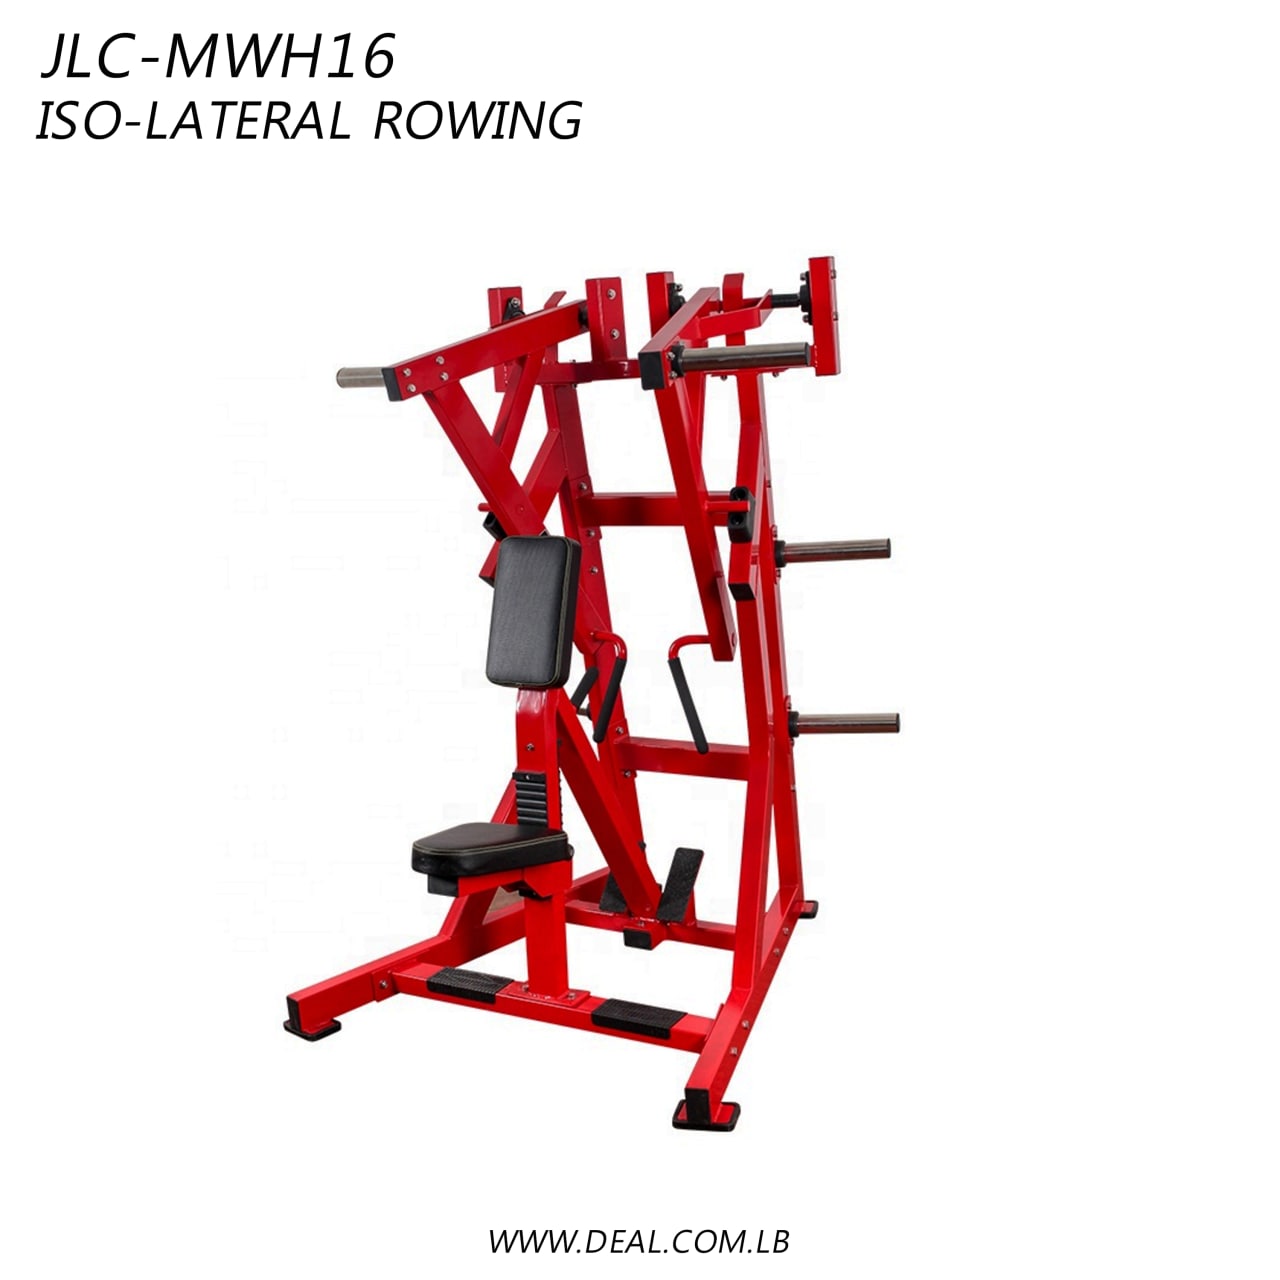 JLC-MWH16 | ISO-Lateral rowing